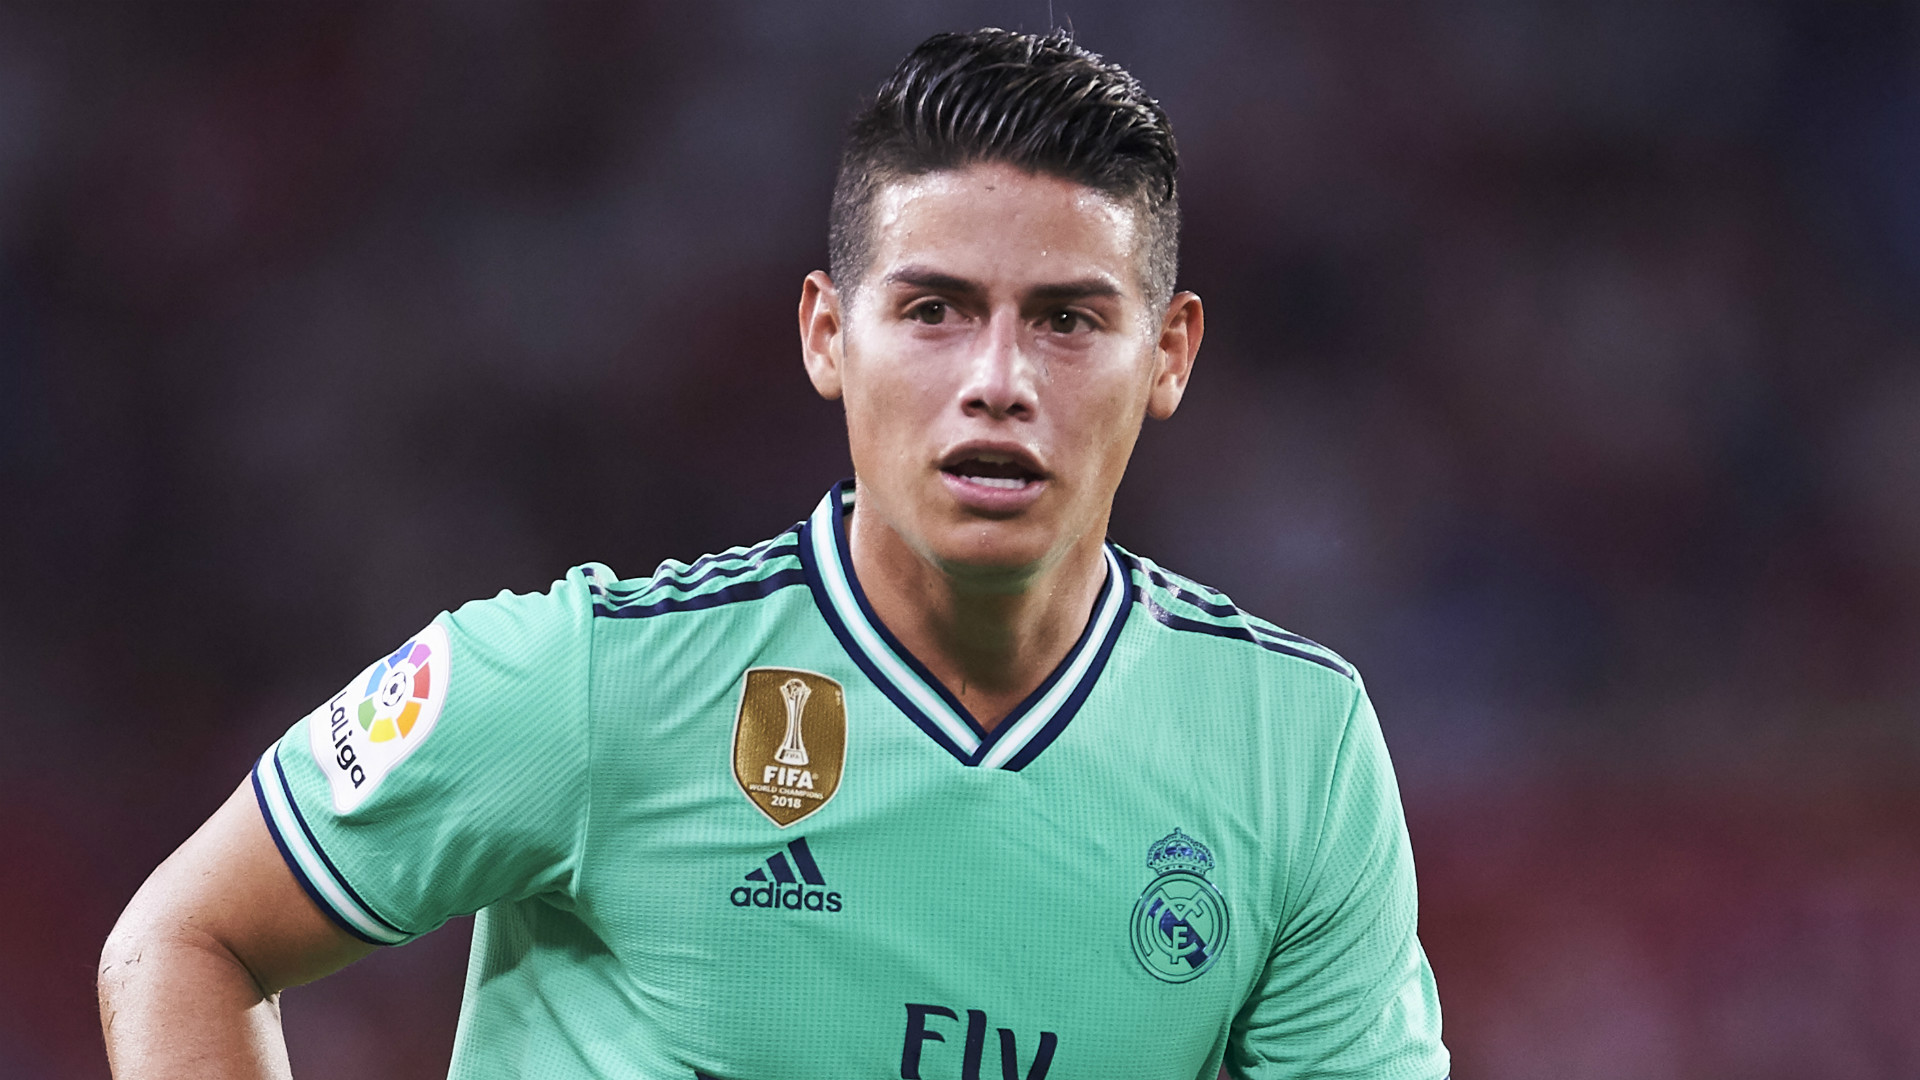 james rodriguez jersey number real madrid